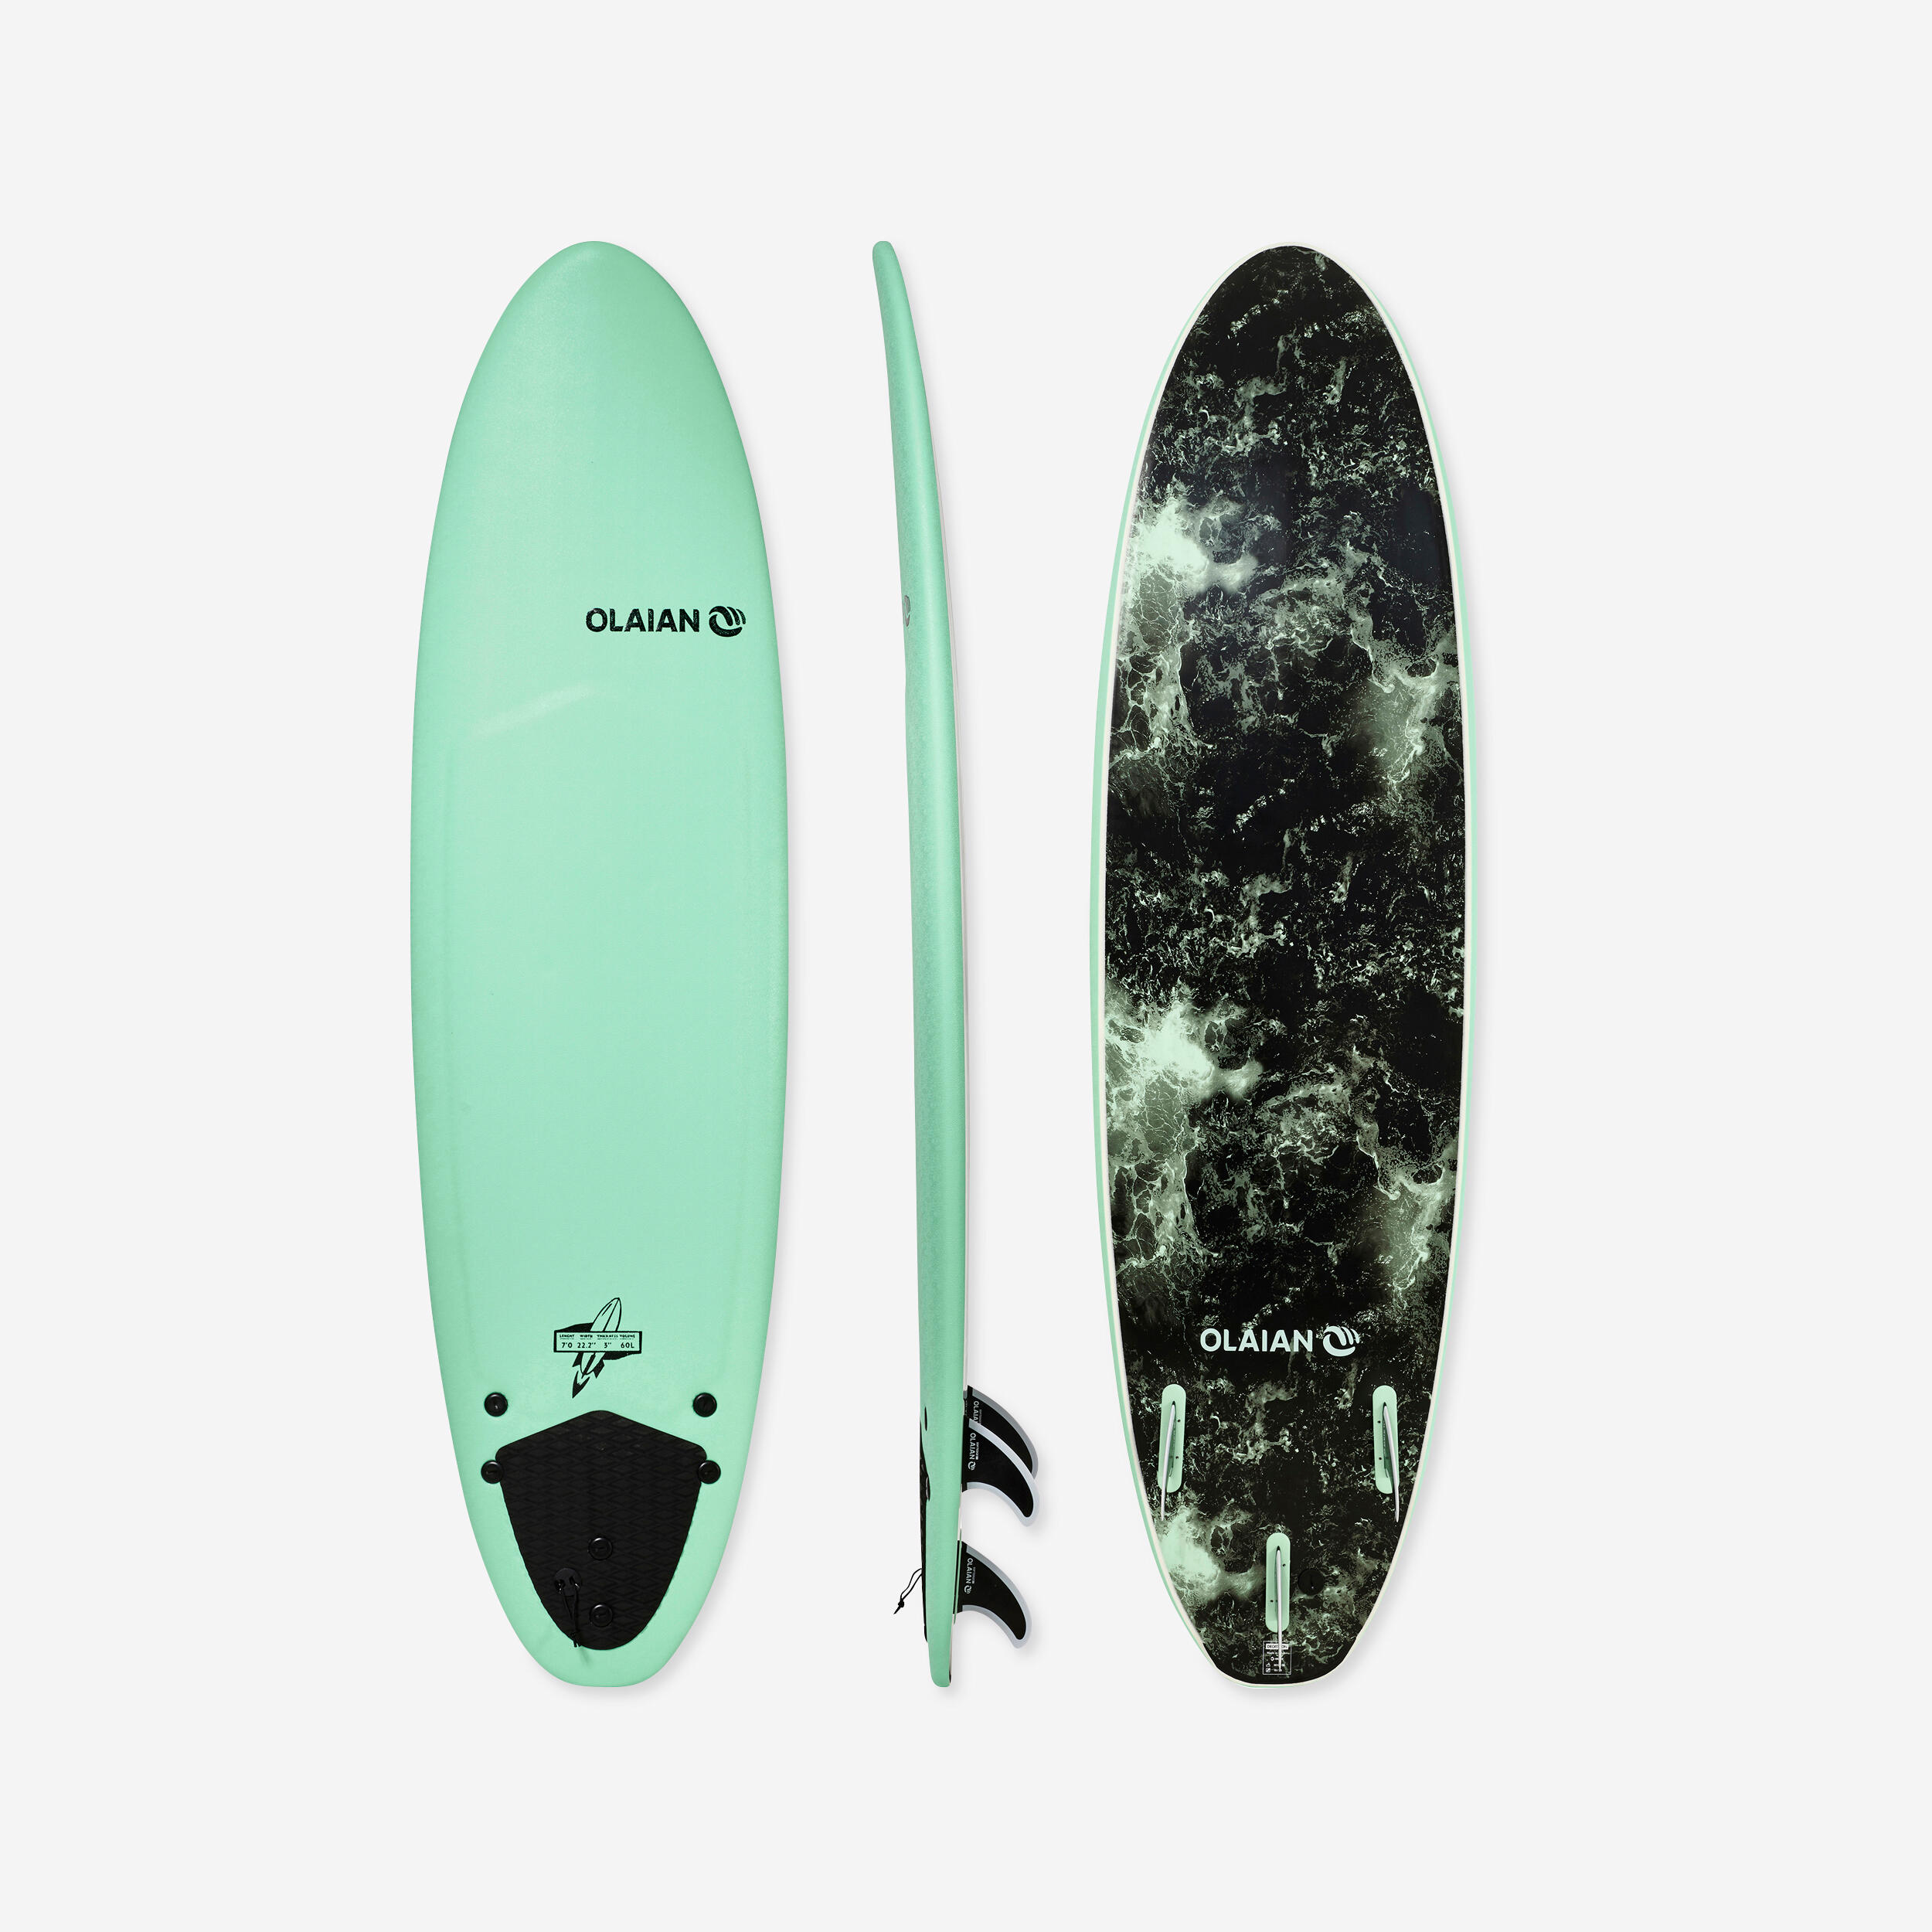 FOAM SURFBOARD 900 7’ . Comes with 3 fins. 1/11